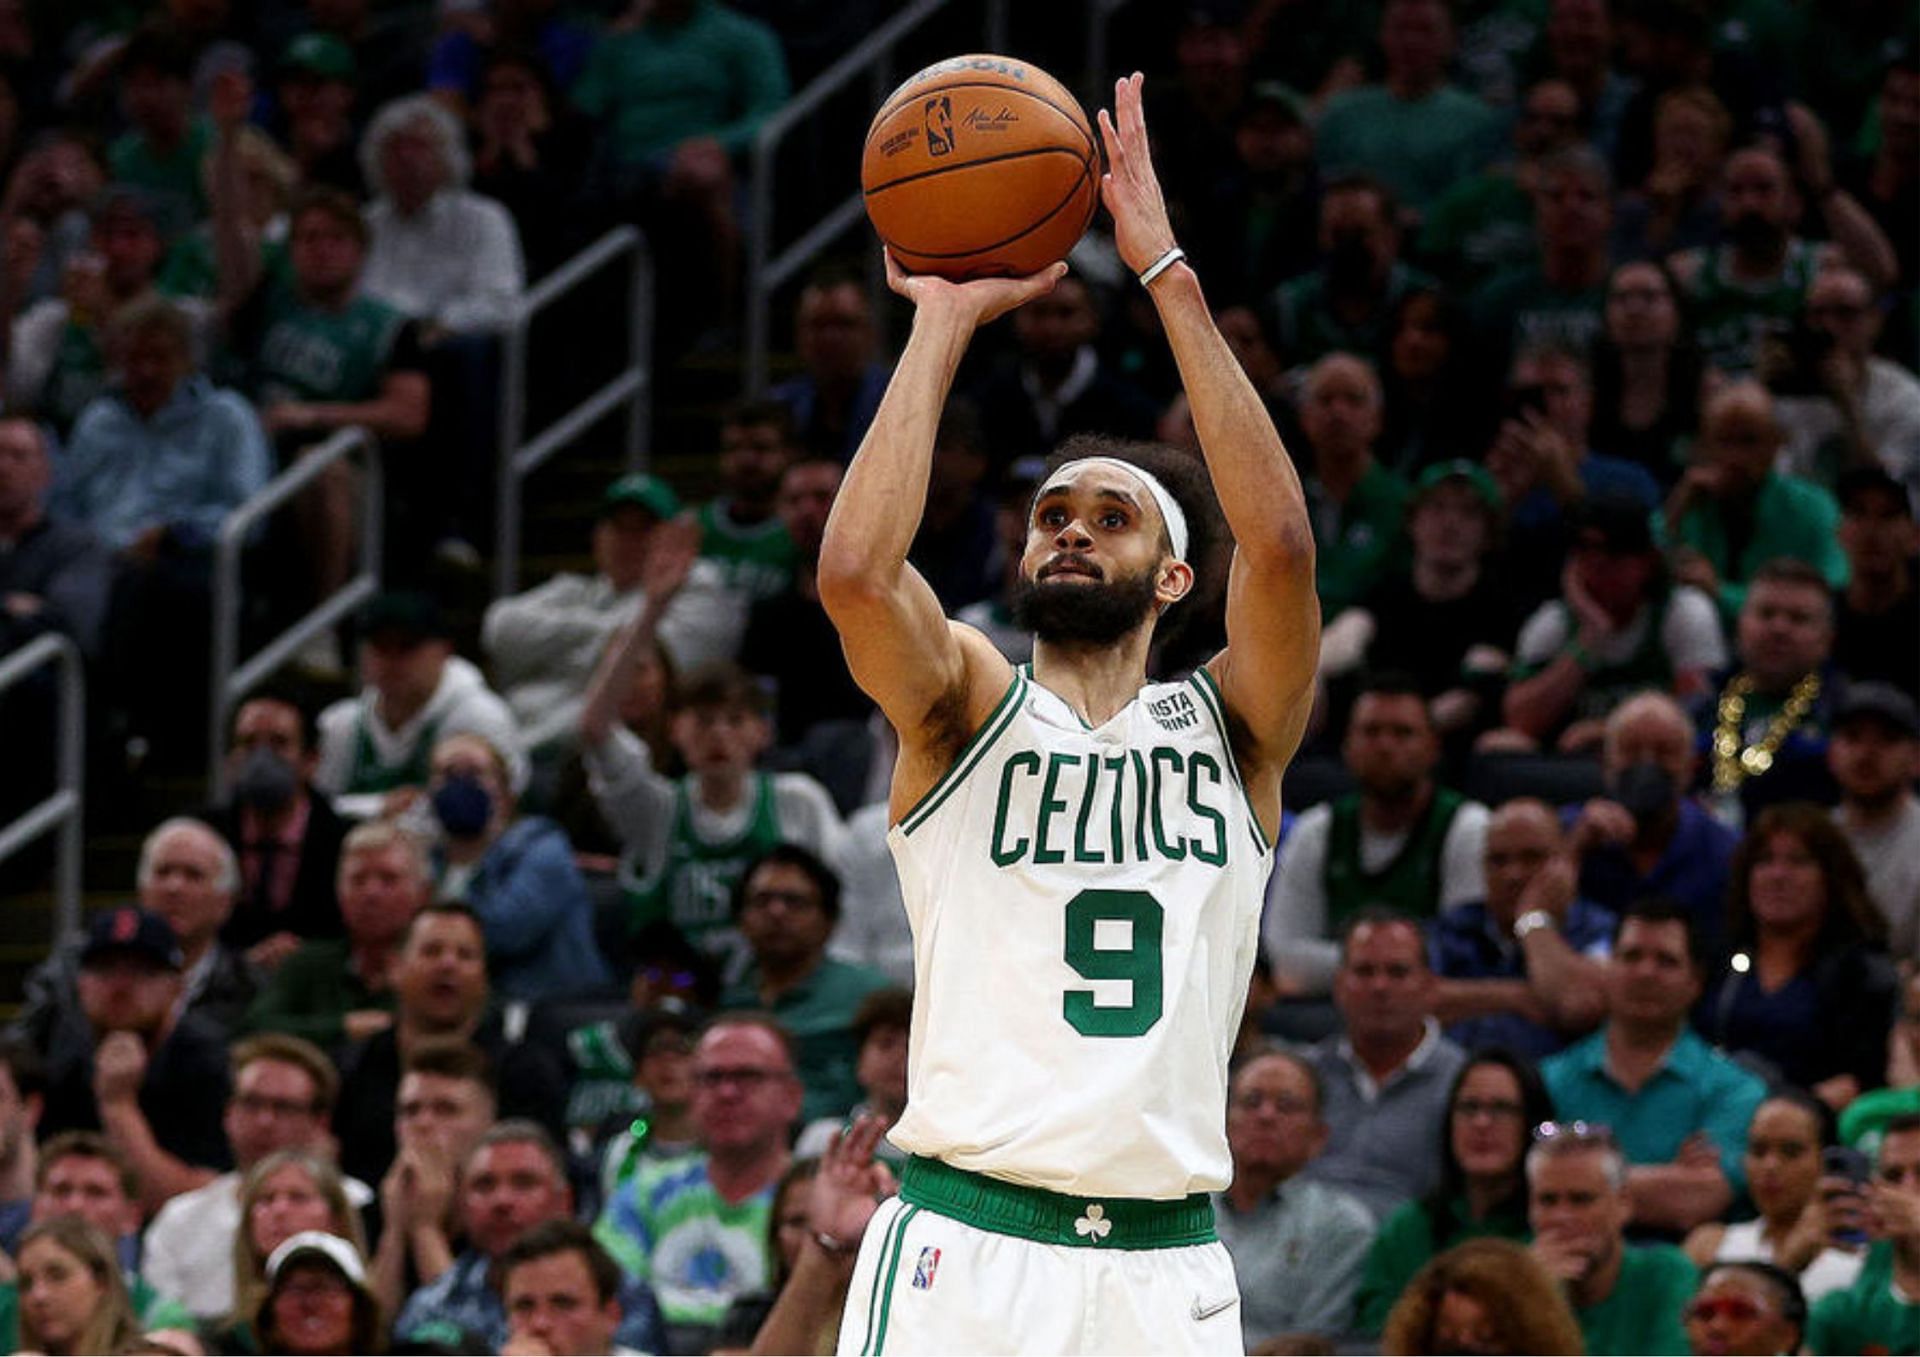 Derrick White sunk a buzzer-beating triple in the first quarter of Game 5 to give the Boston Celtics a 35-20 lead.